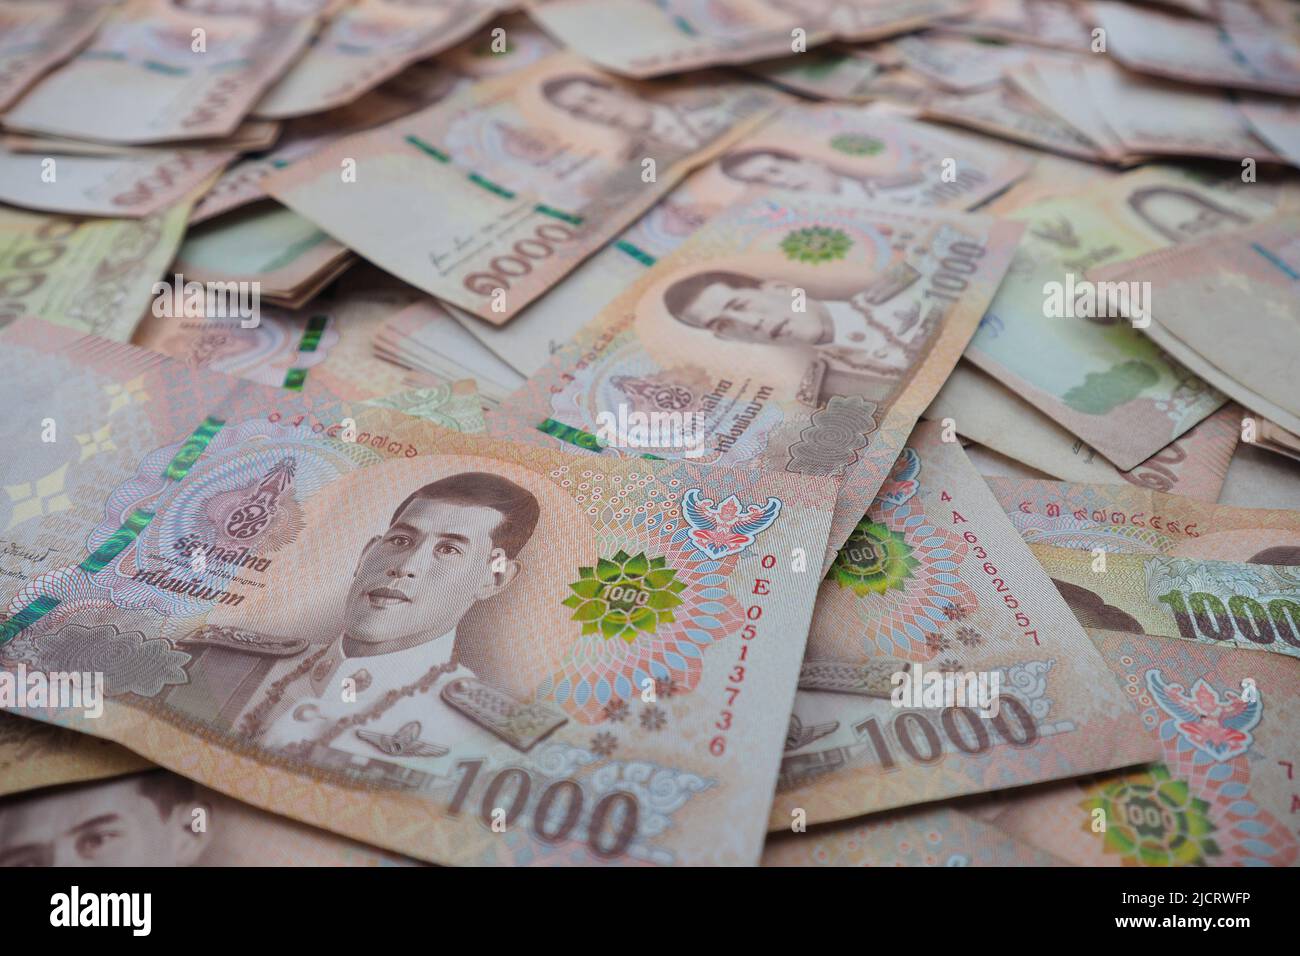 Close-up a pile of one thousand Thai Baht (THB) banknotes of Thailand. Cash of thousand baht bills, Background image with high resolution. Stock Photo